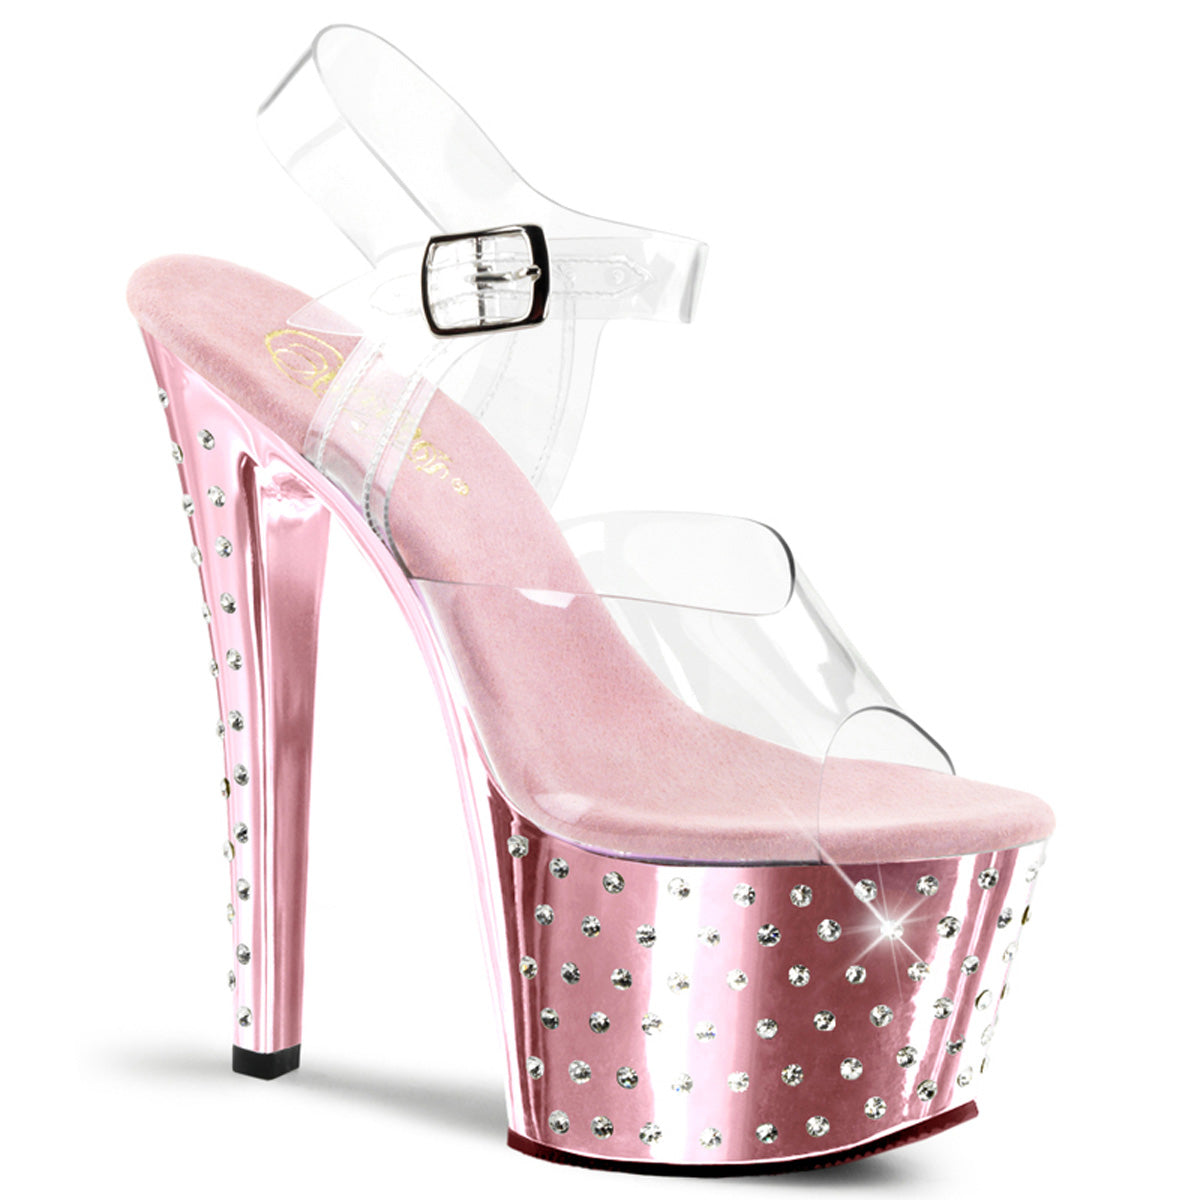 STARDUST-708 Pleaser 7" Heel Clear Baby Pink Strippers Shoes